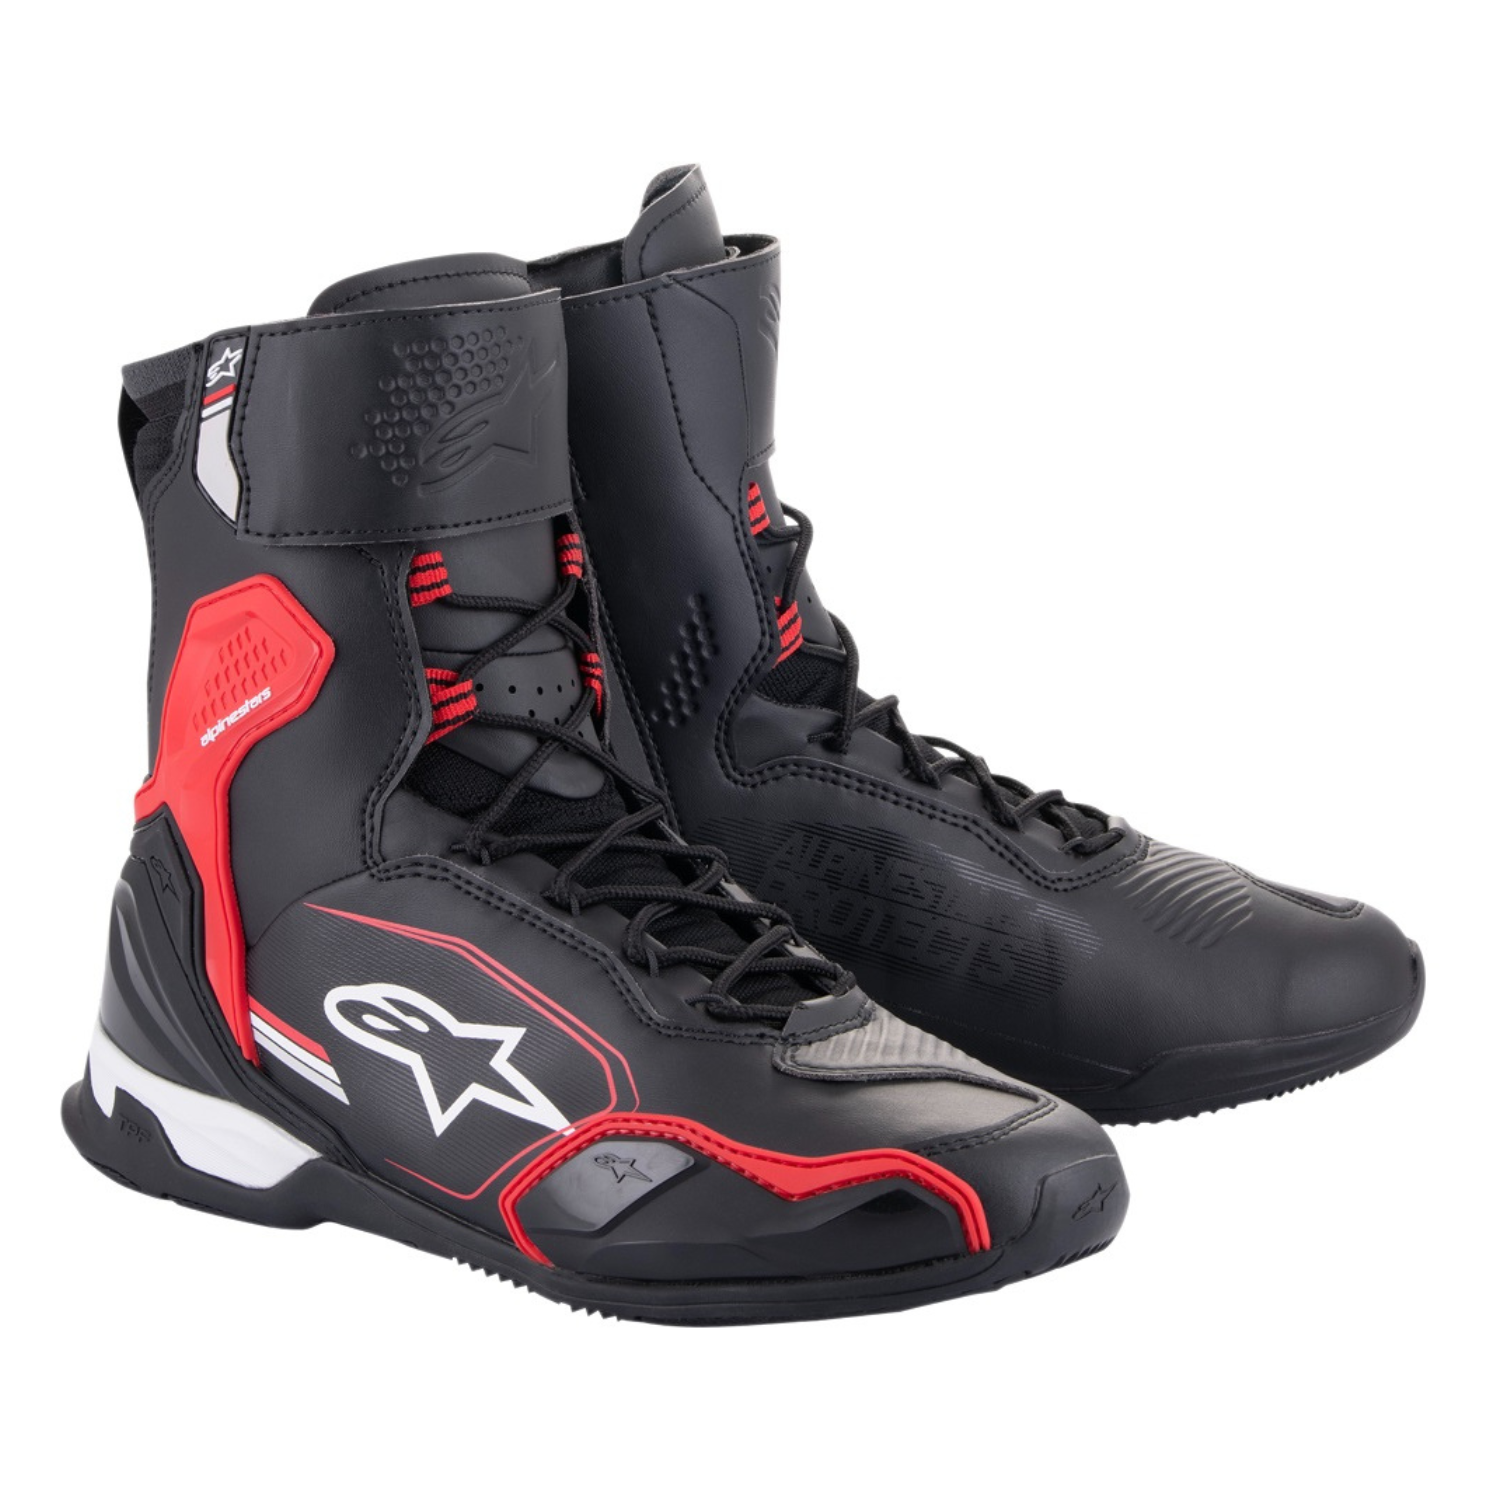 Image of Alpinestars Superfaster Shoes Black Bright Red White Taille US 95